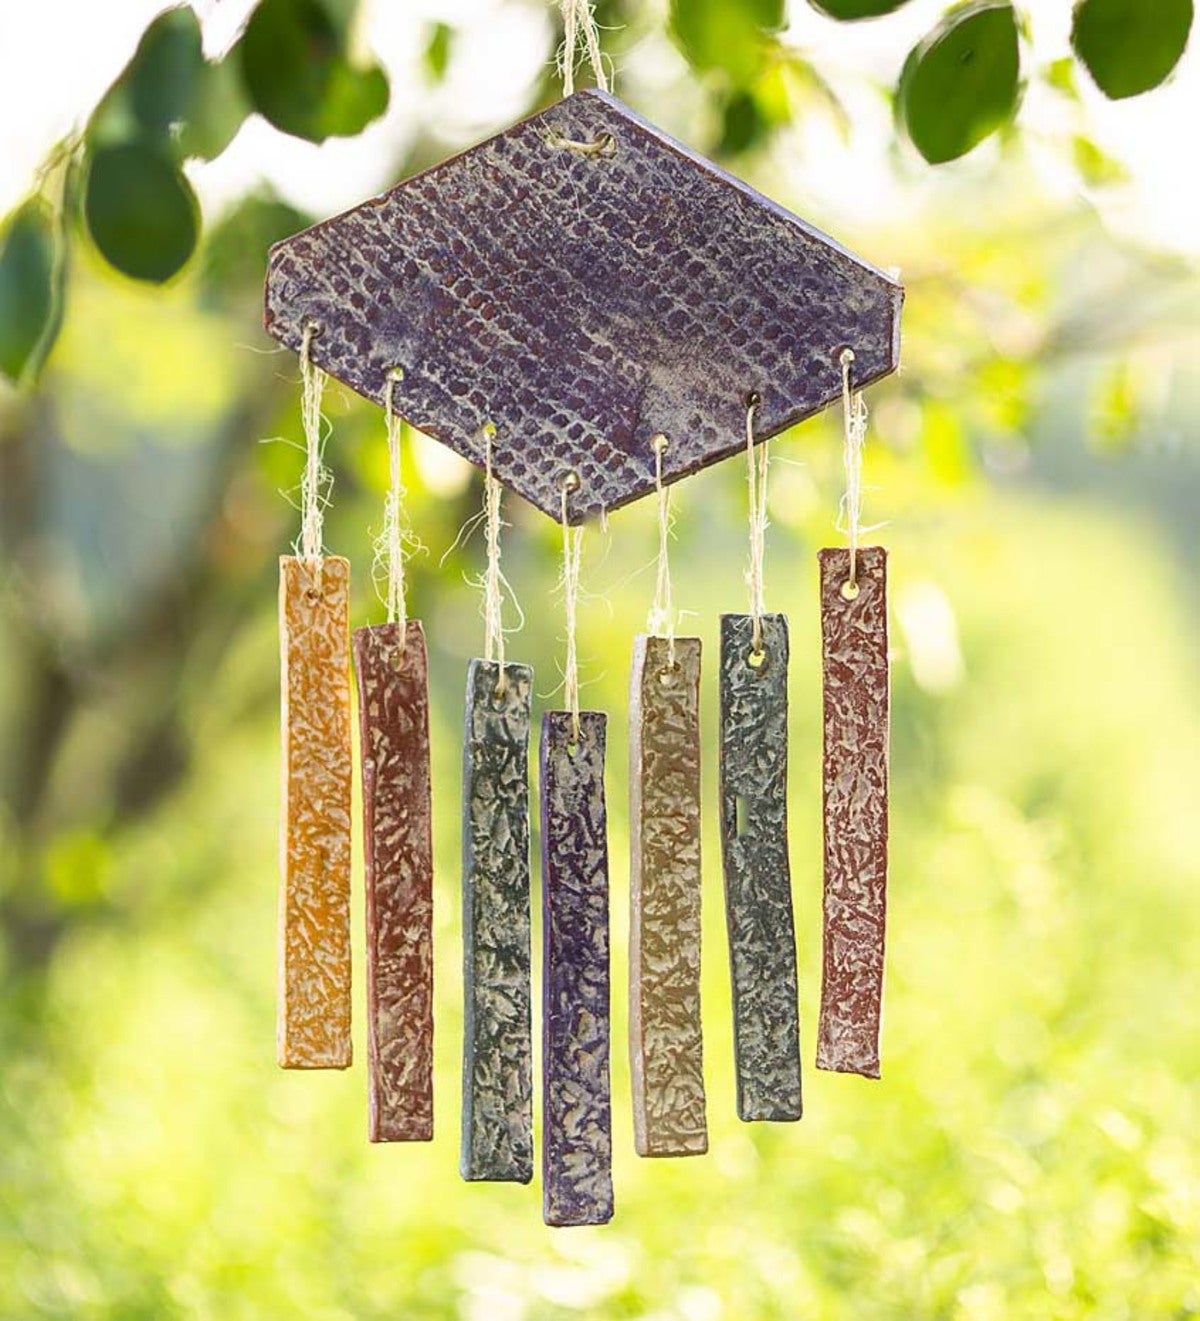 Handcrafted Multi-Colored Clay Chimes